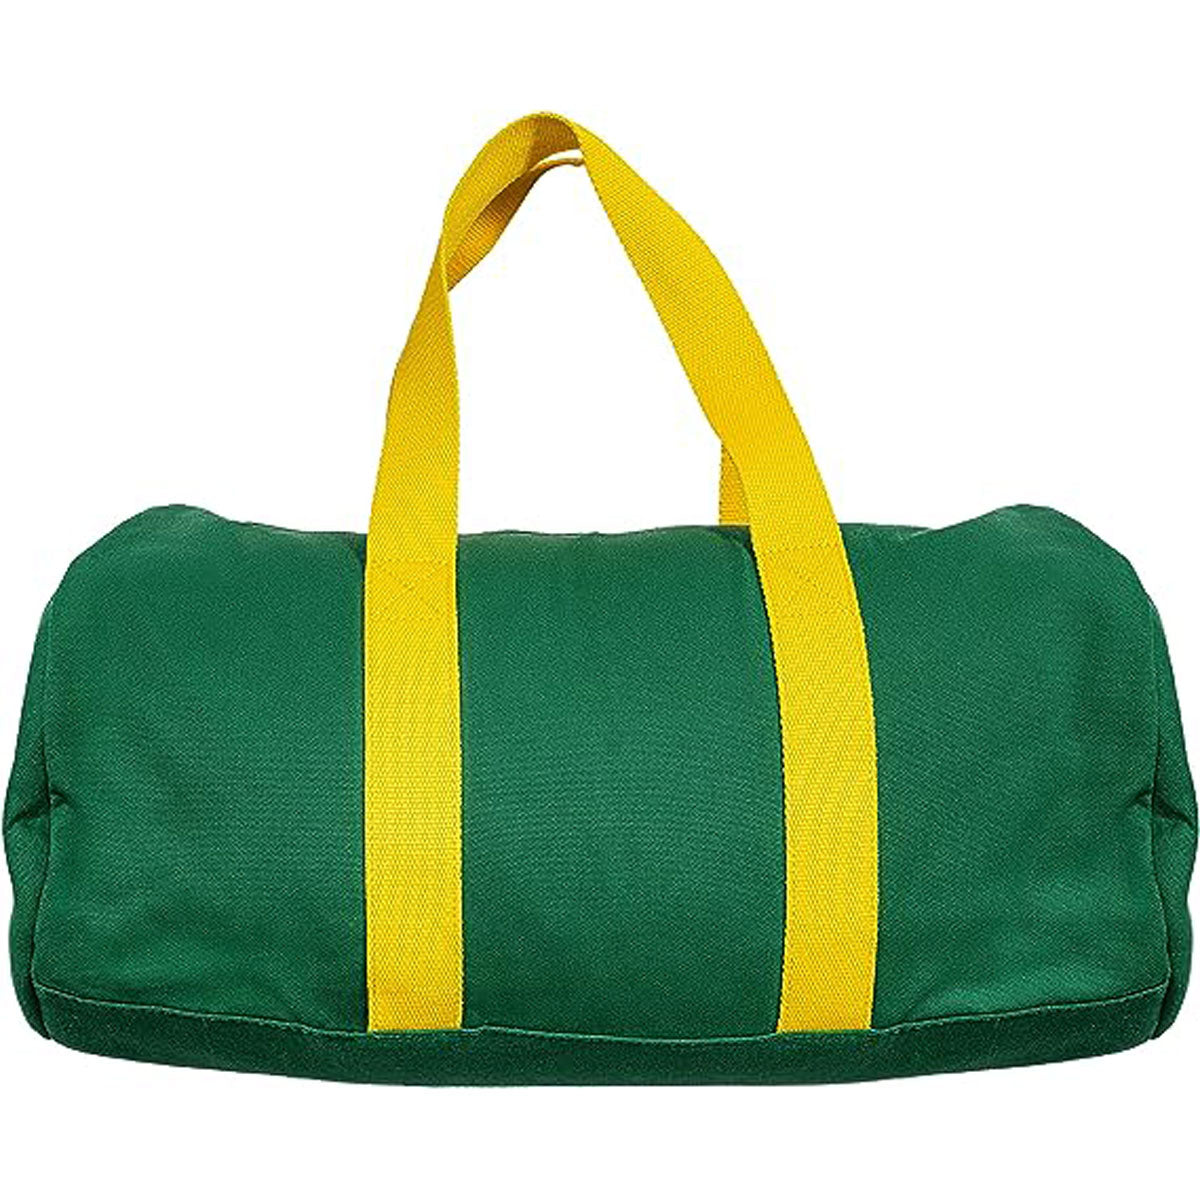 Pineapple Movie Saul Duffle Bag Halloween Costume Accessory Lightweight for Travel Gym Cosplay Green